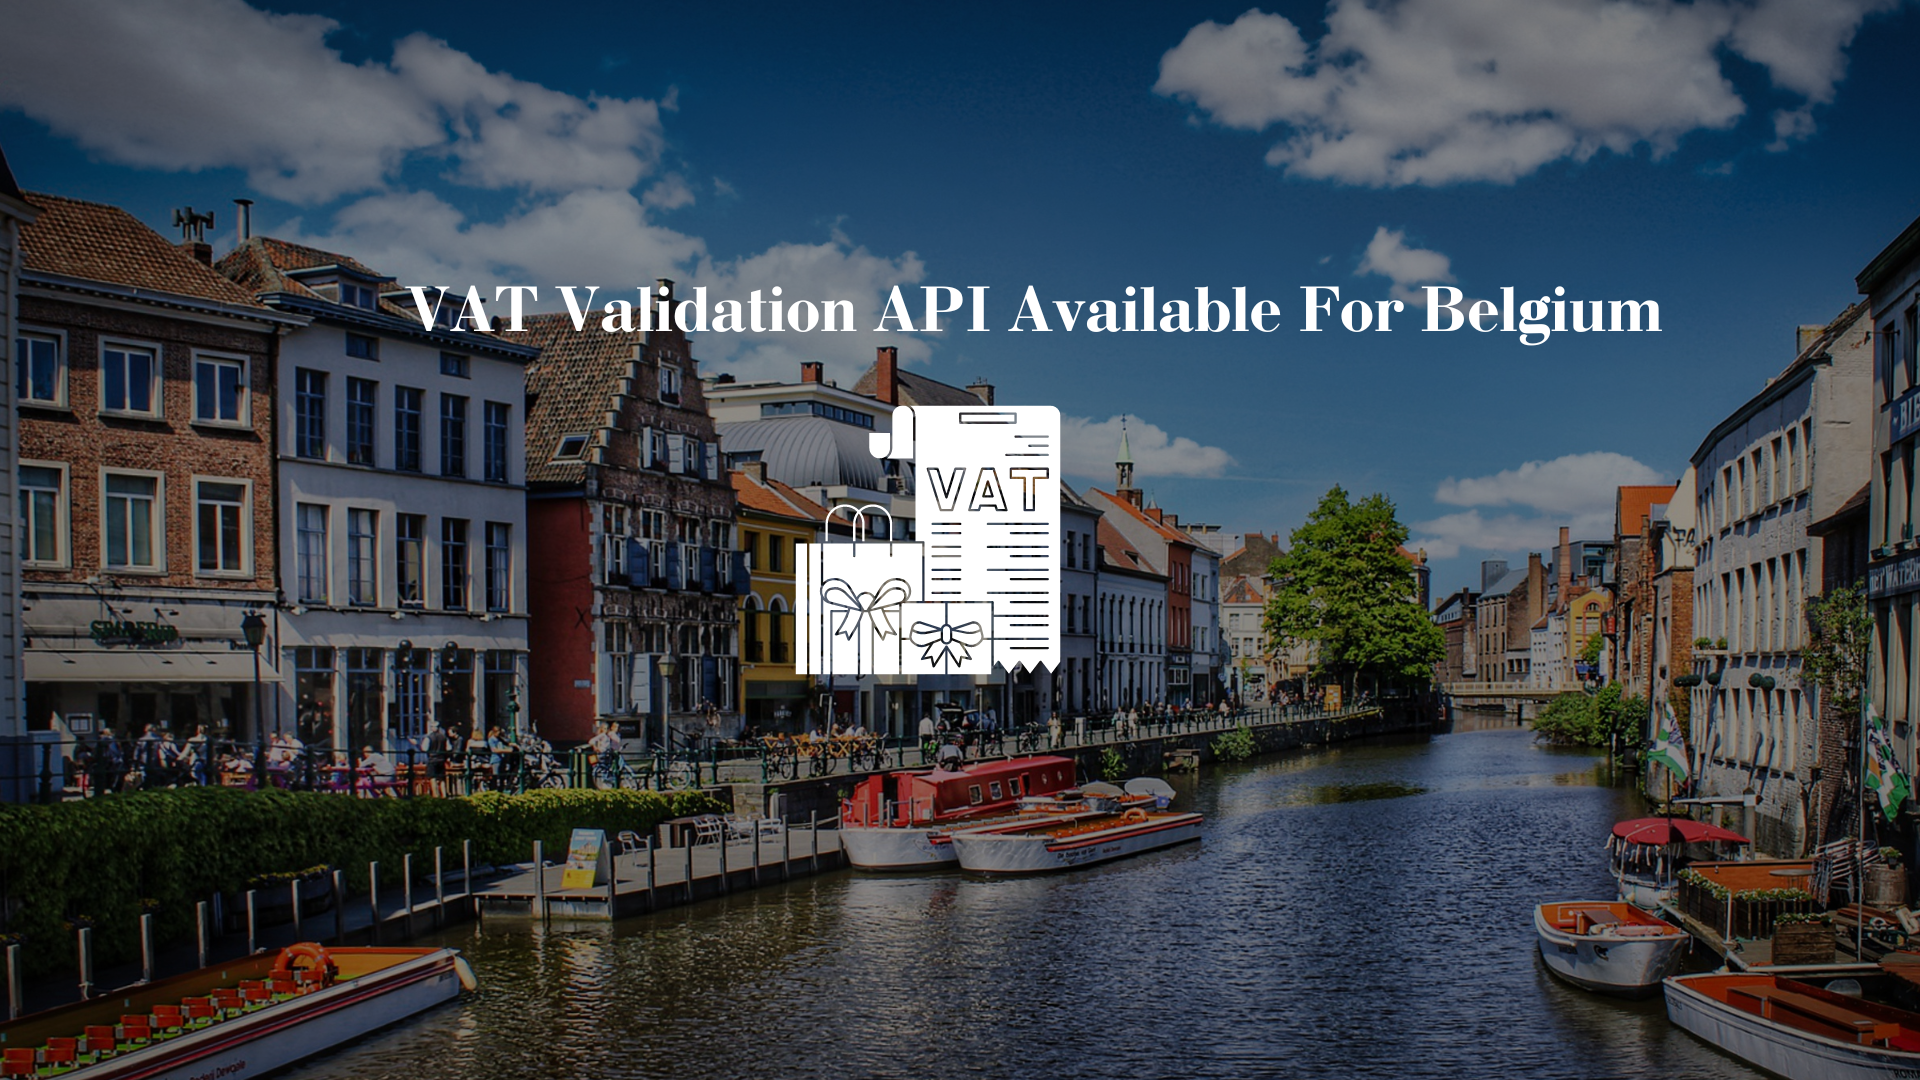 VAT Validation API Available For Belgium